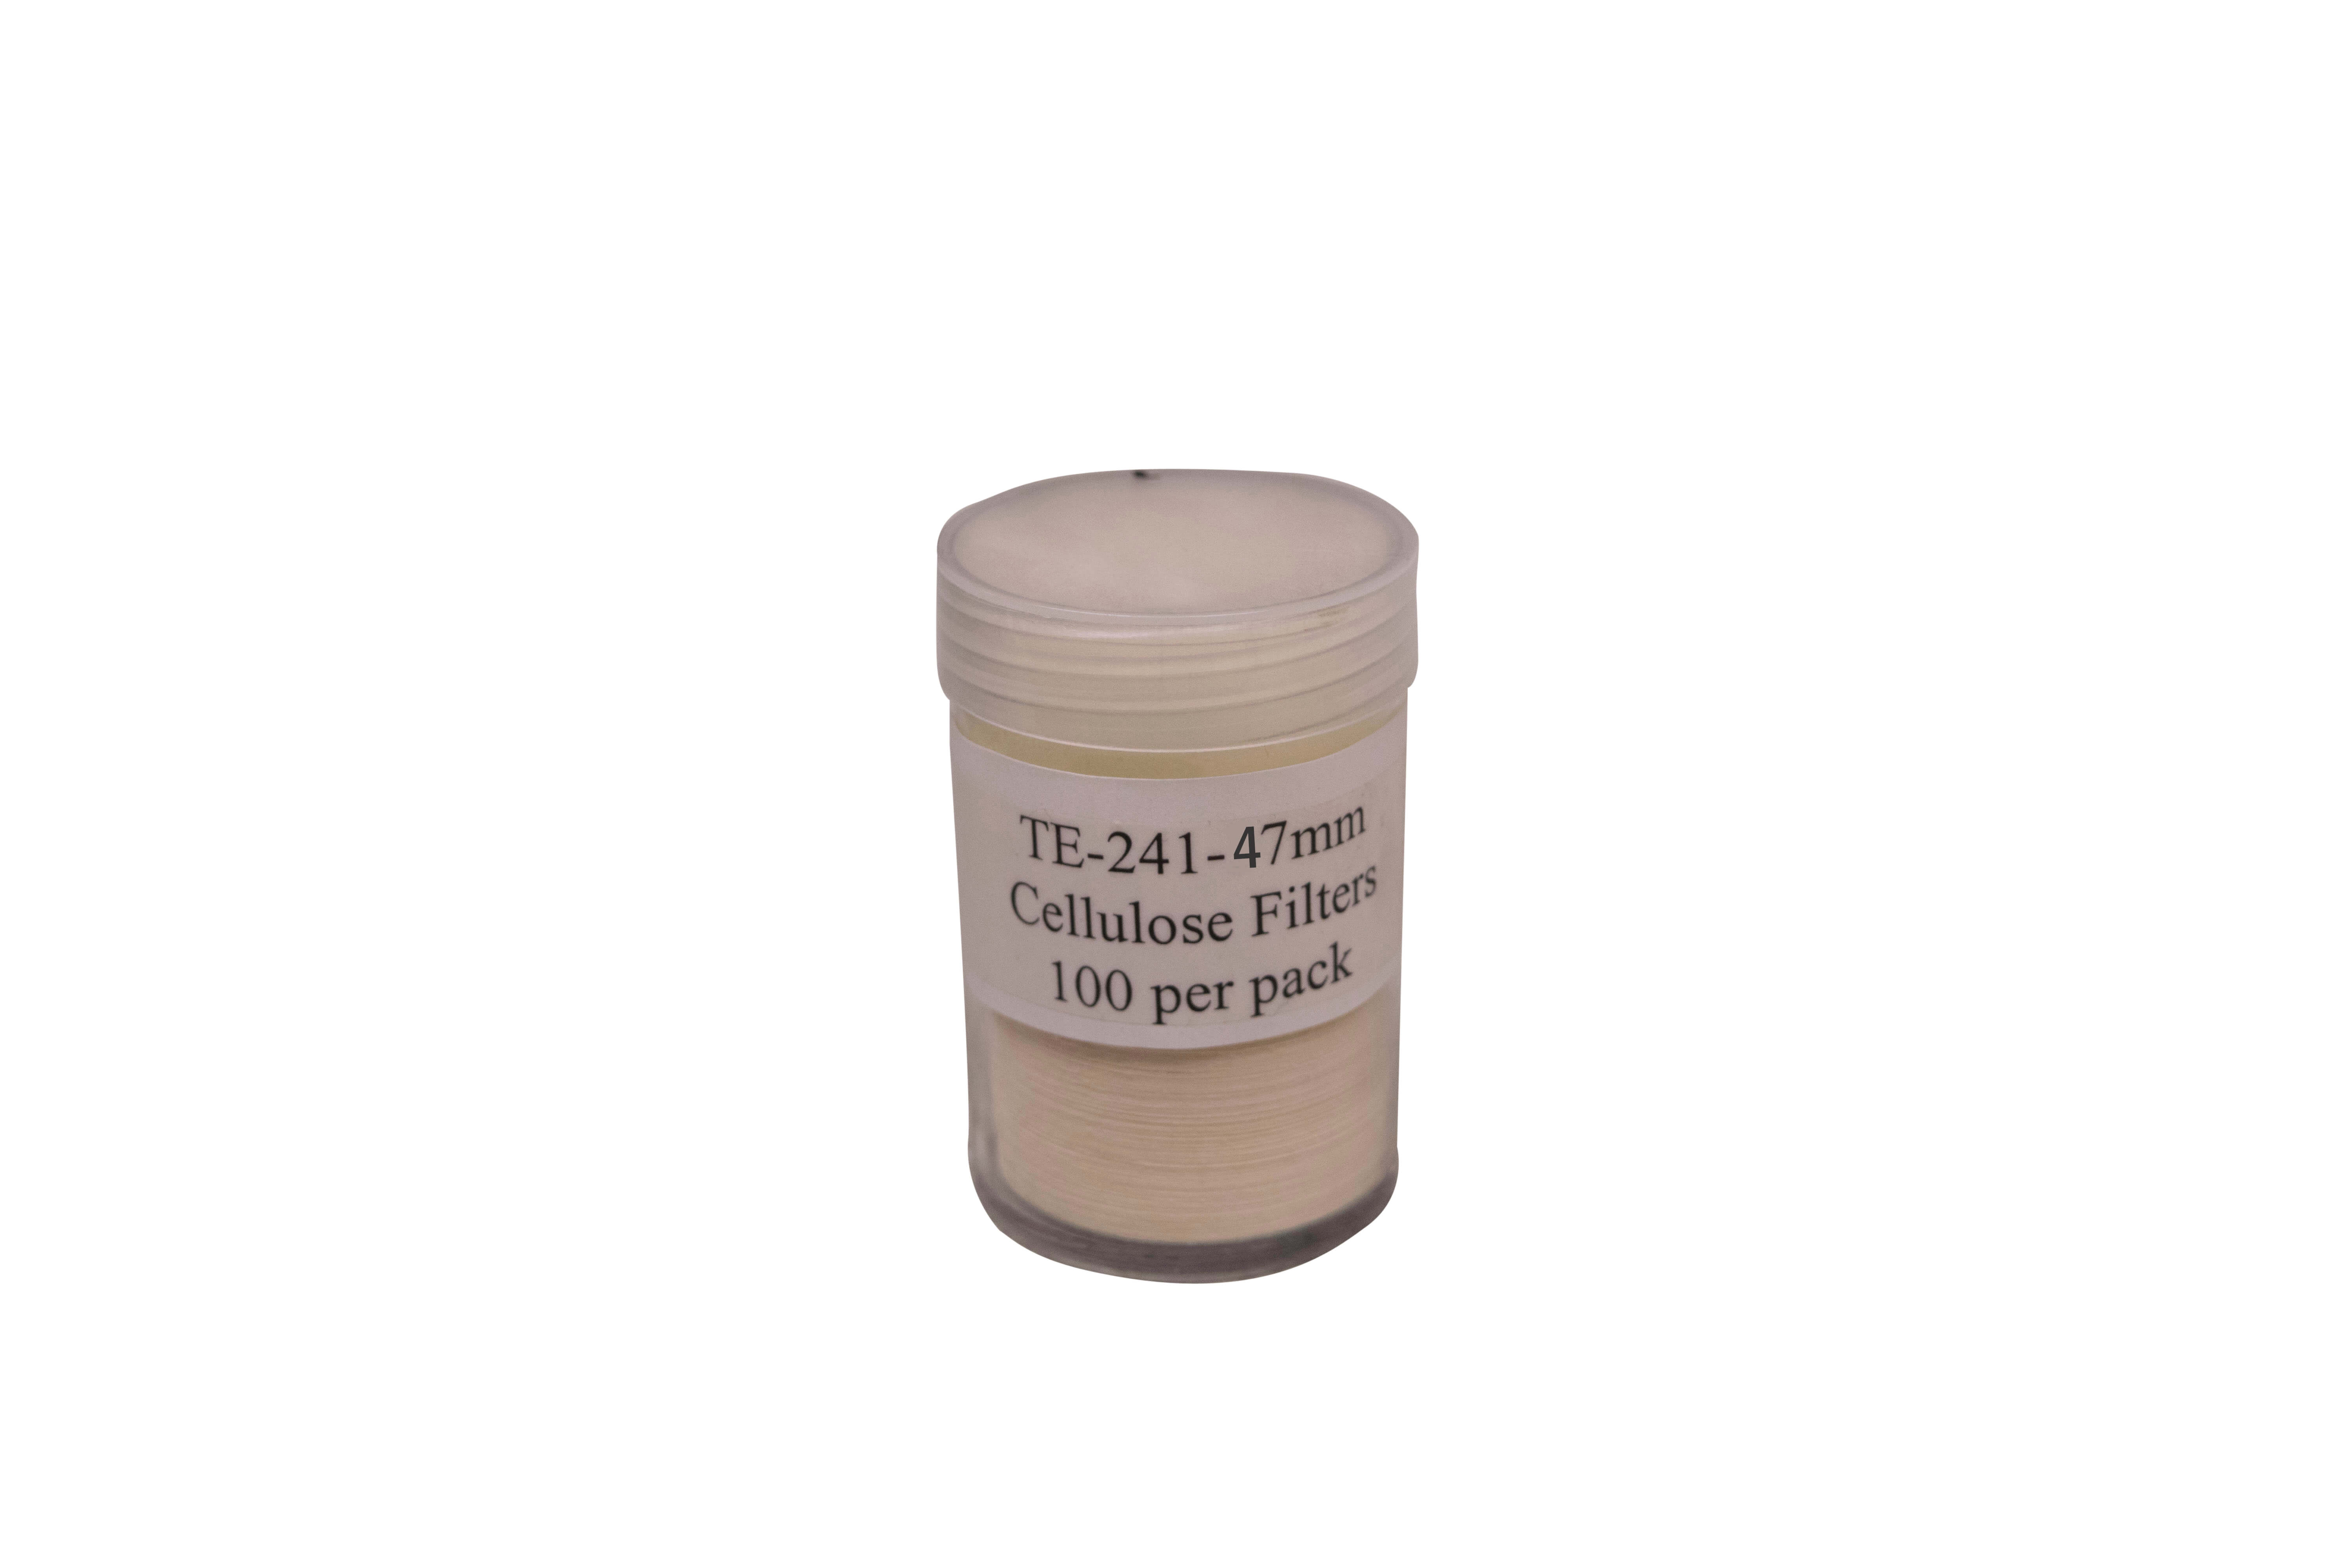 47mm Cellulose filters